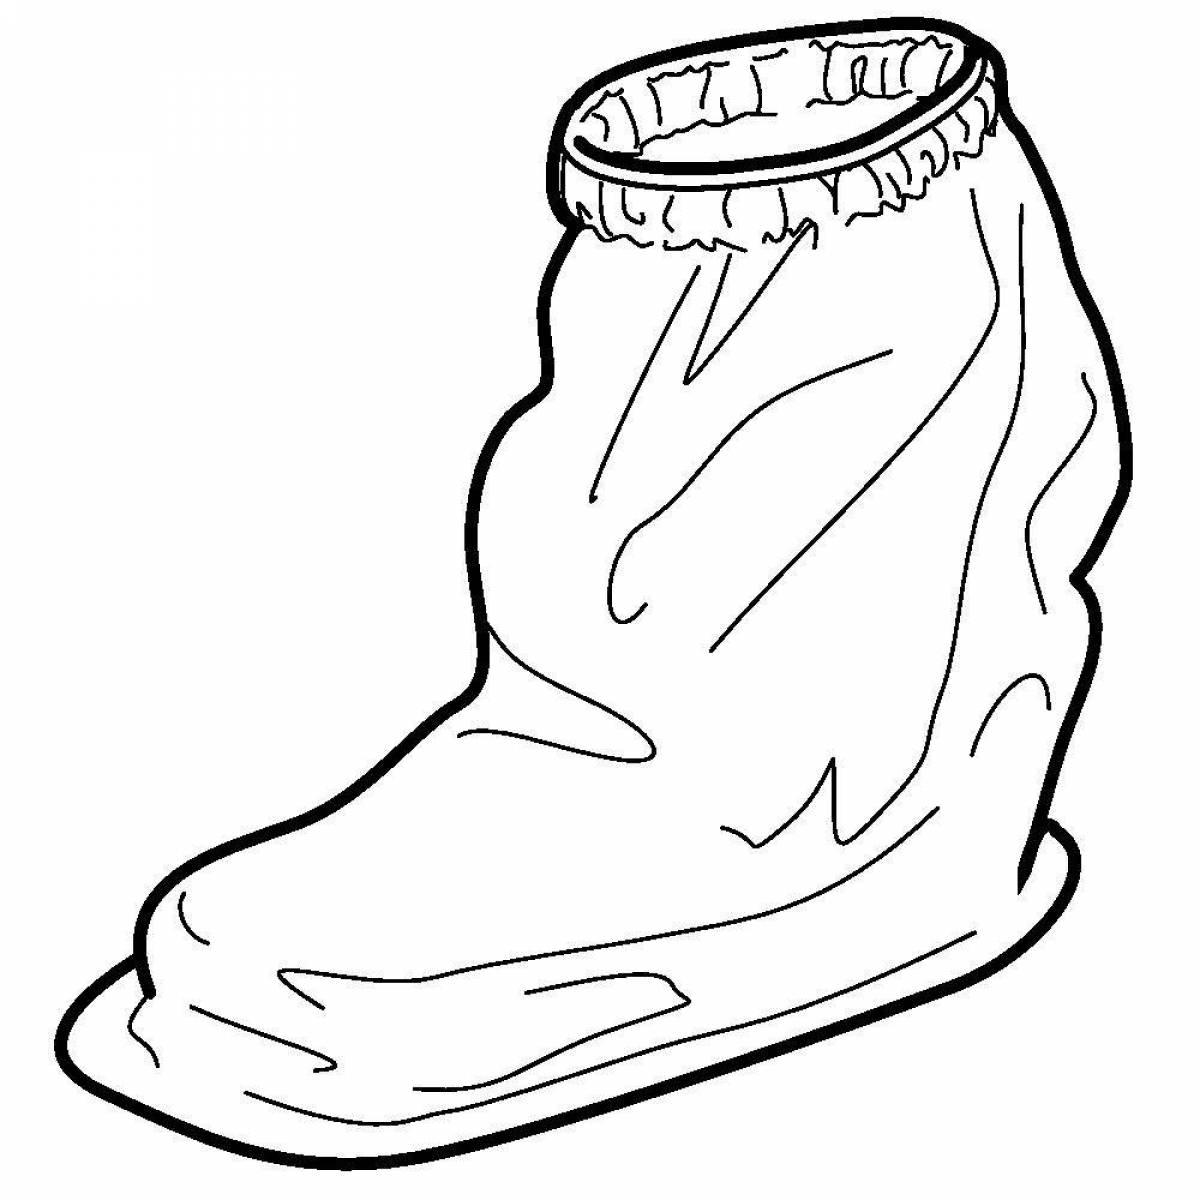 Coloring page cute galoshes